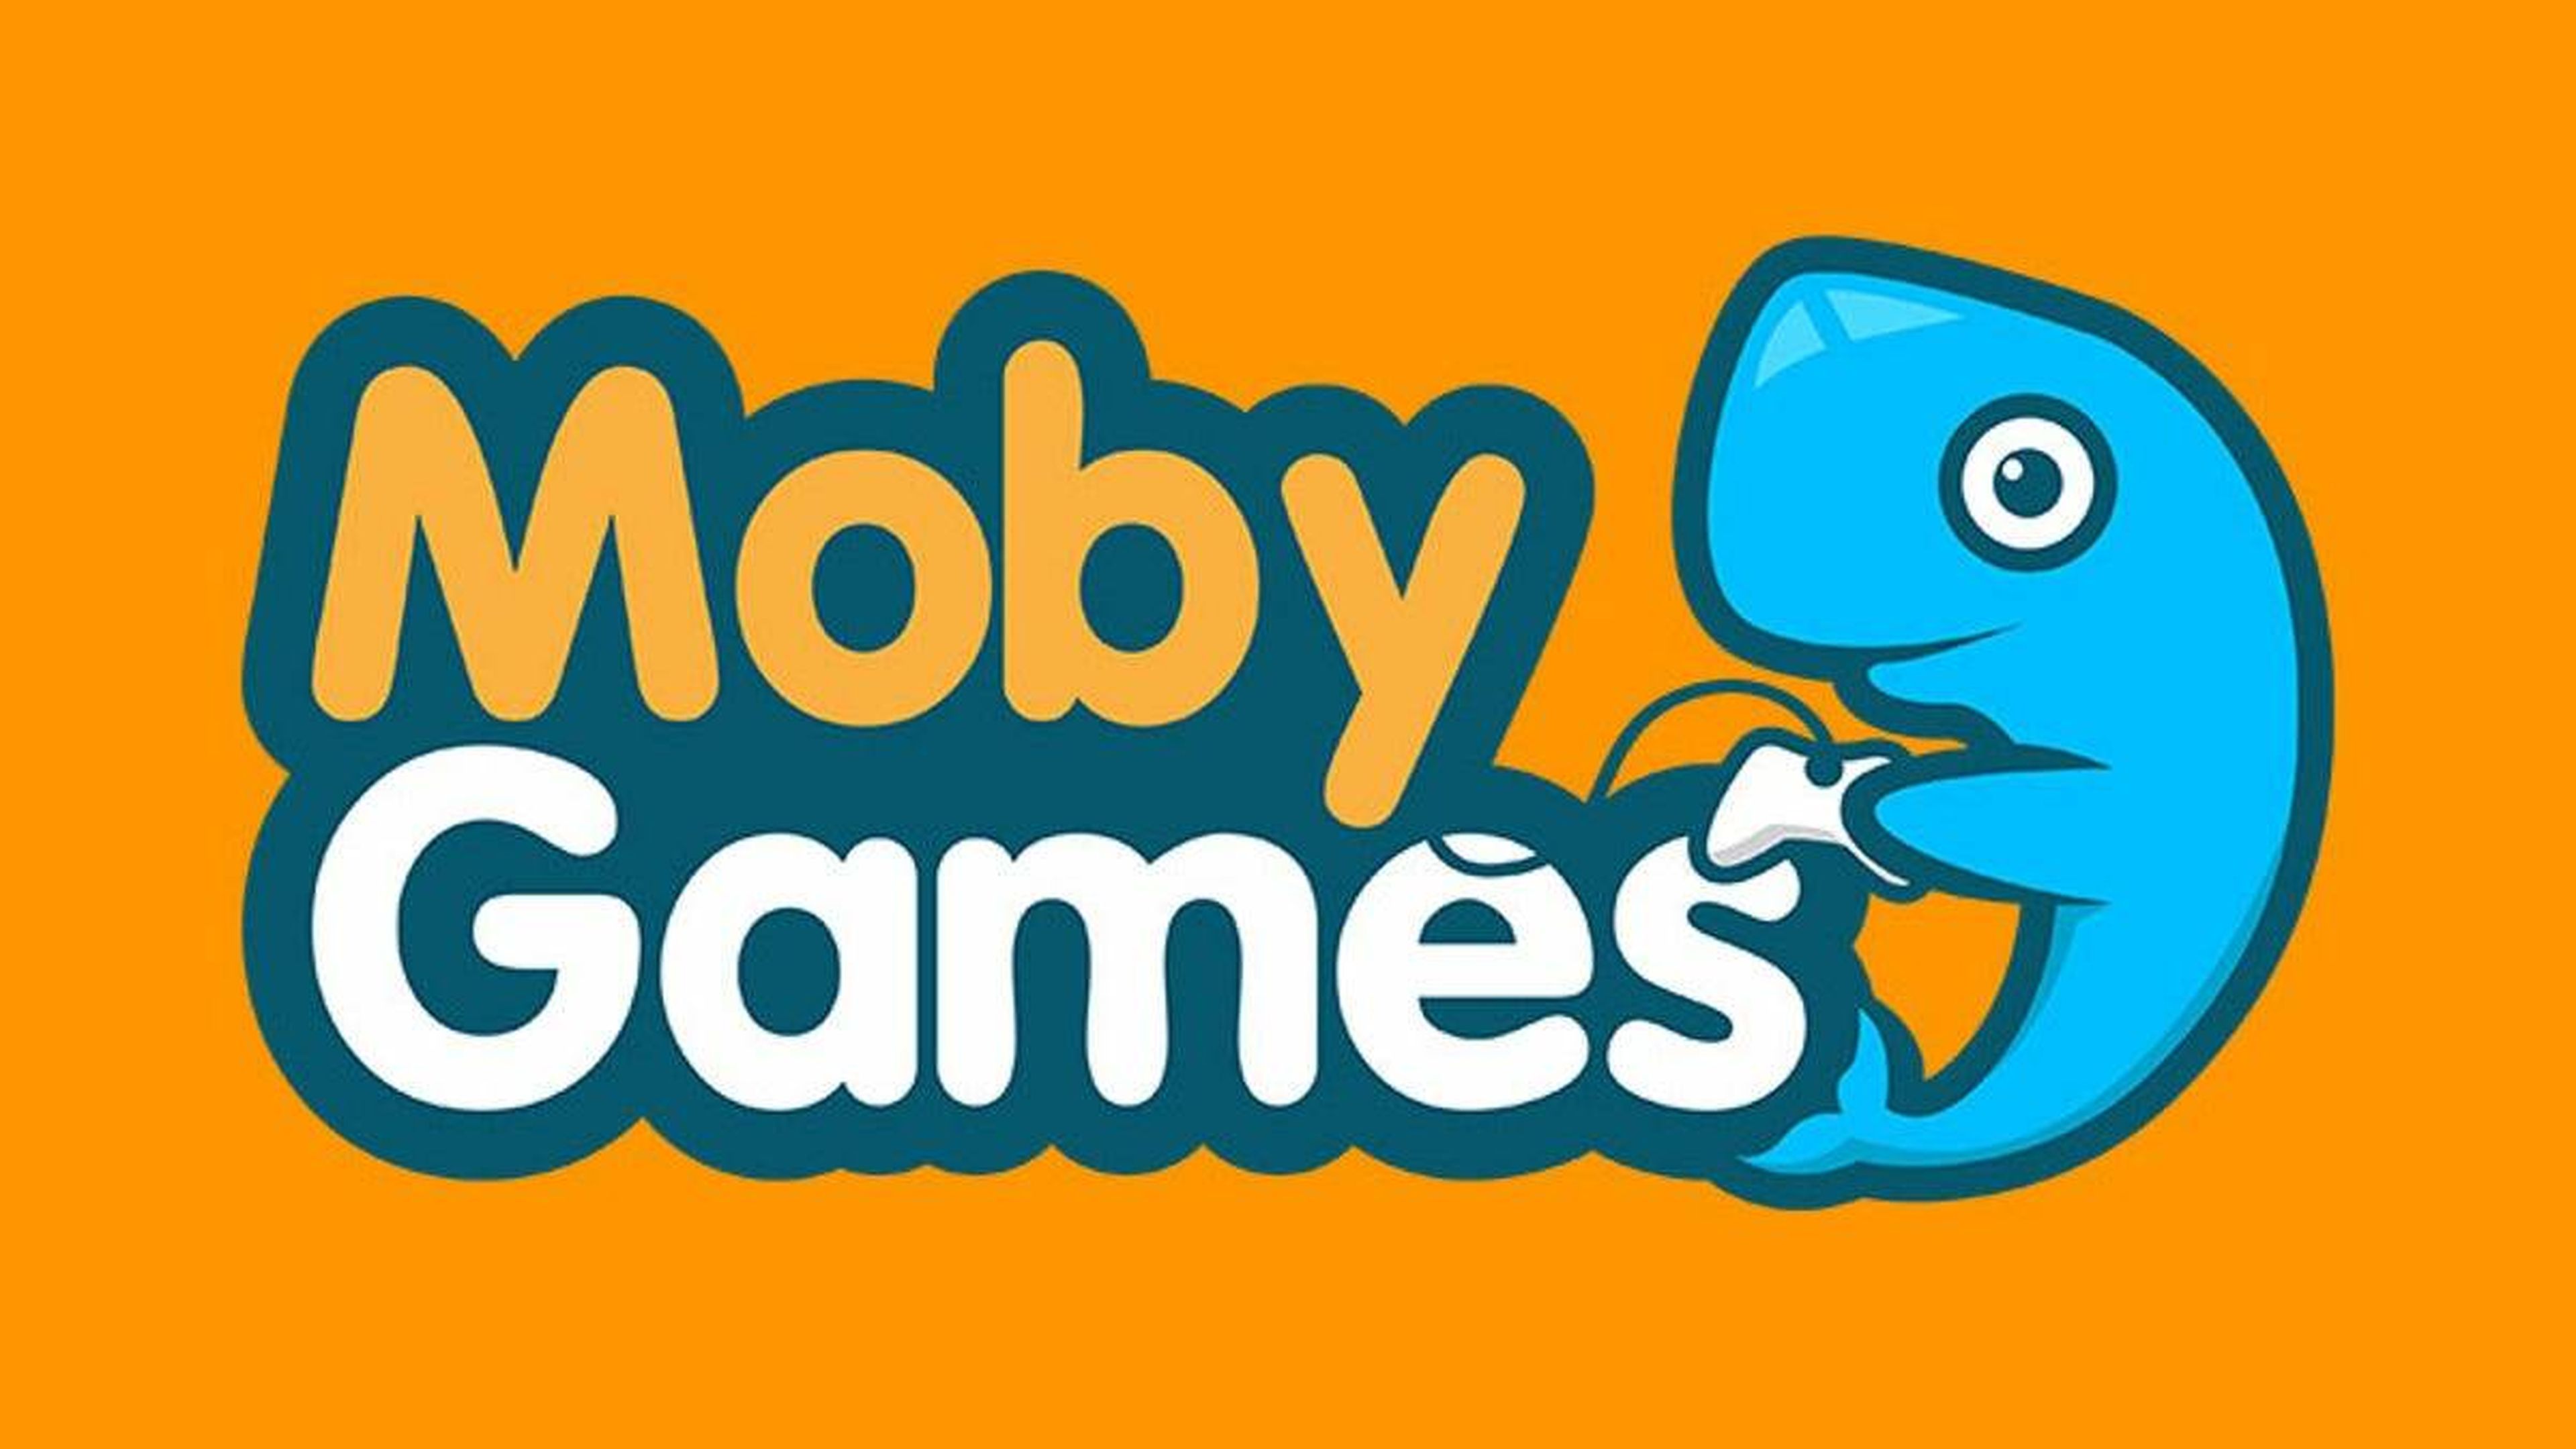 Moby Games